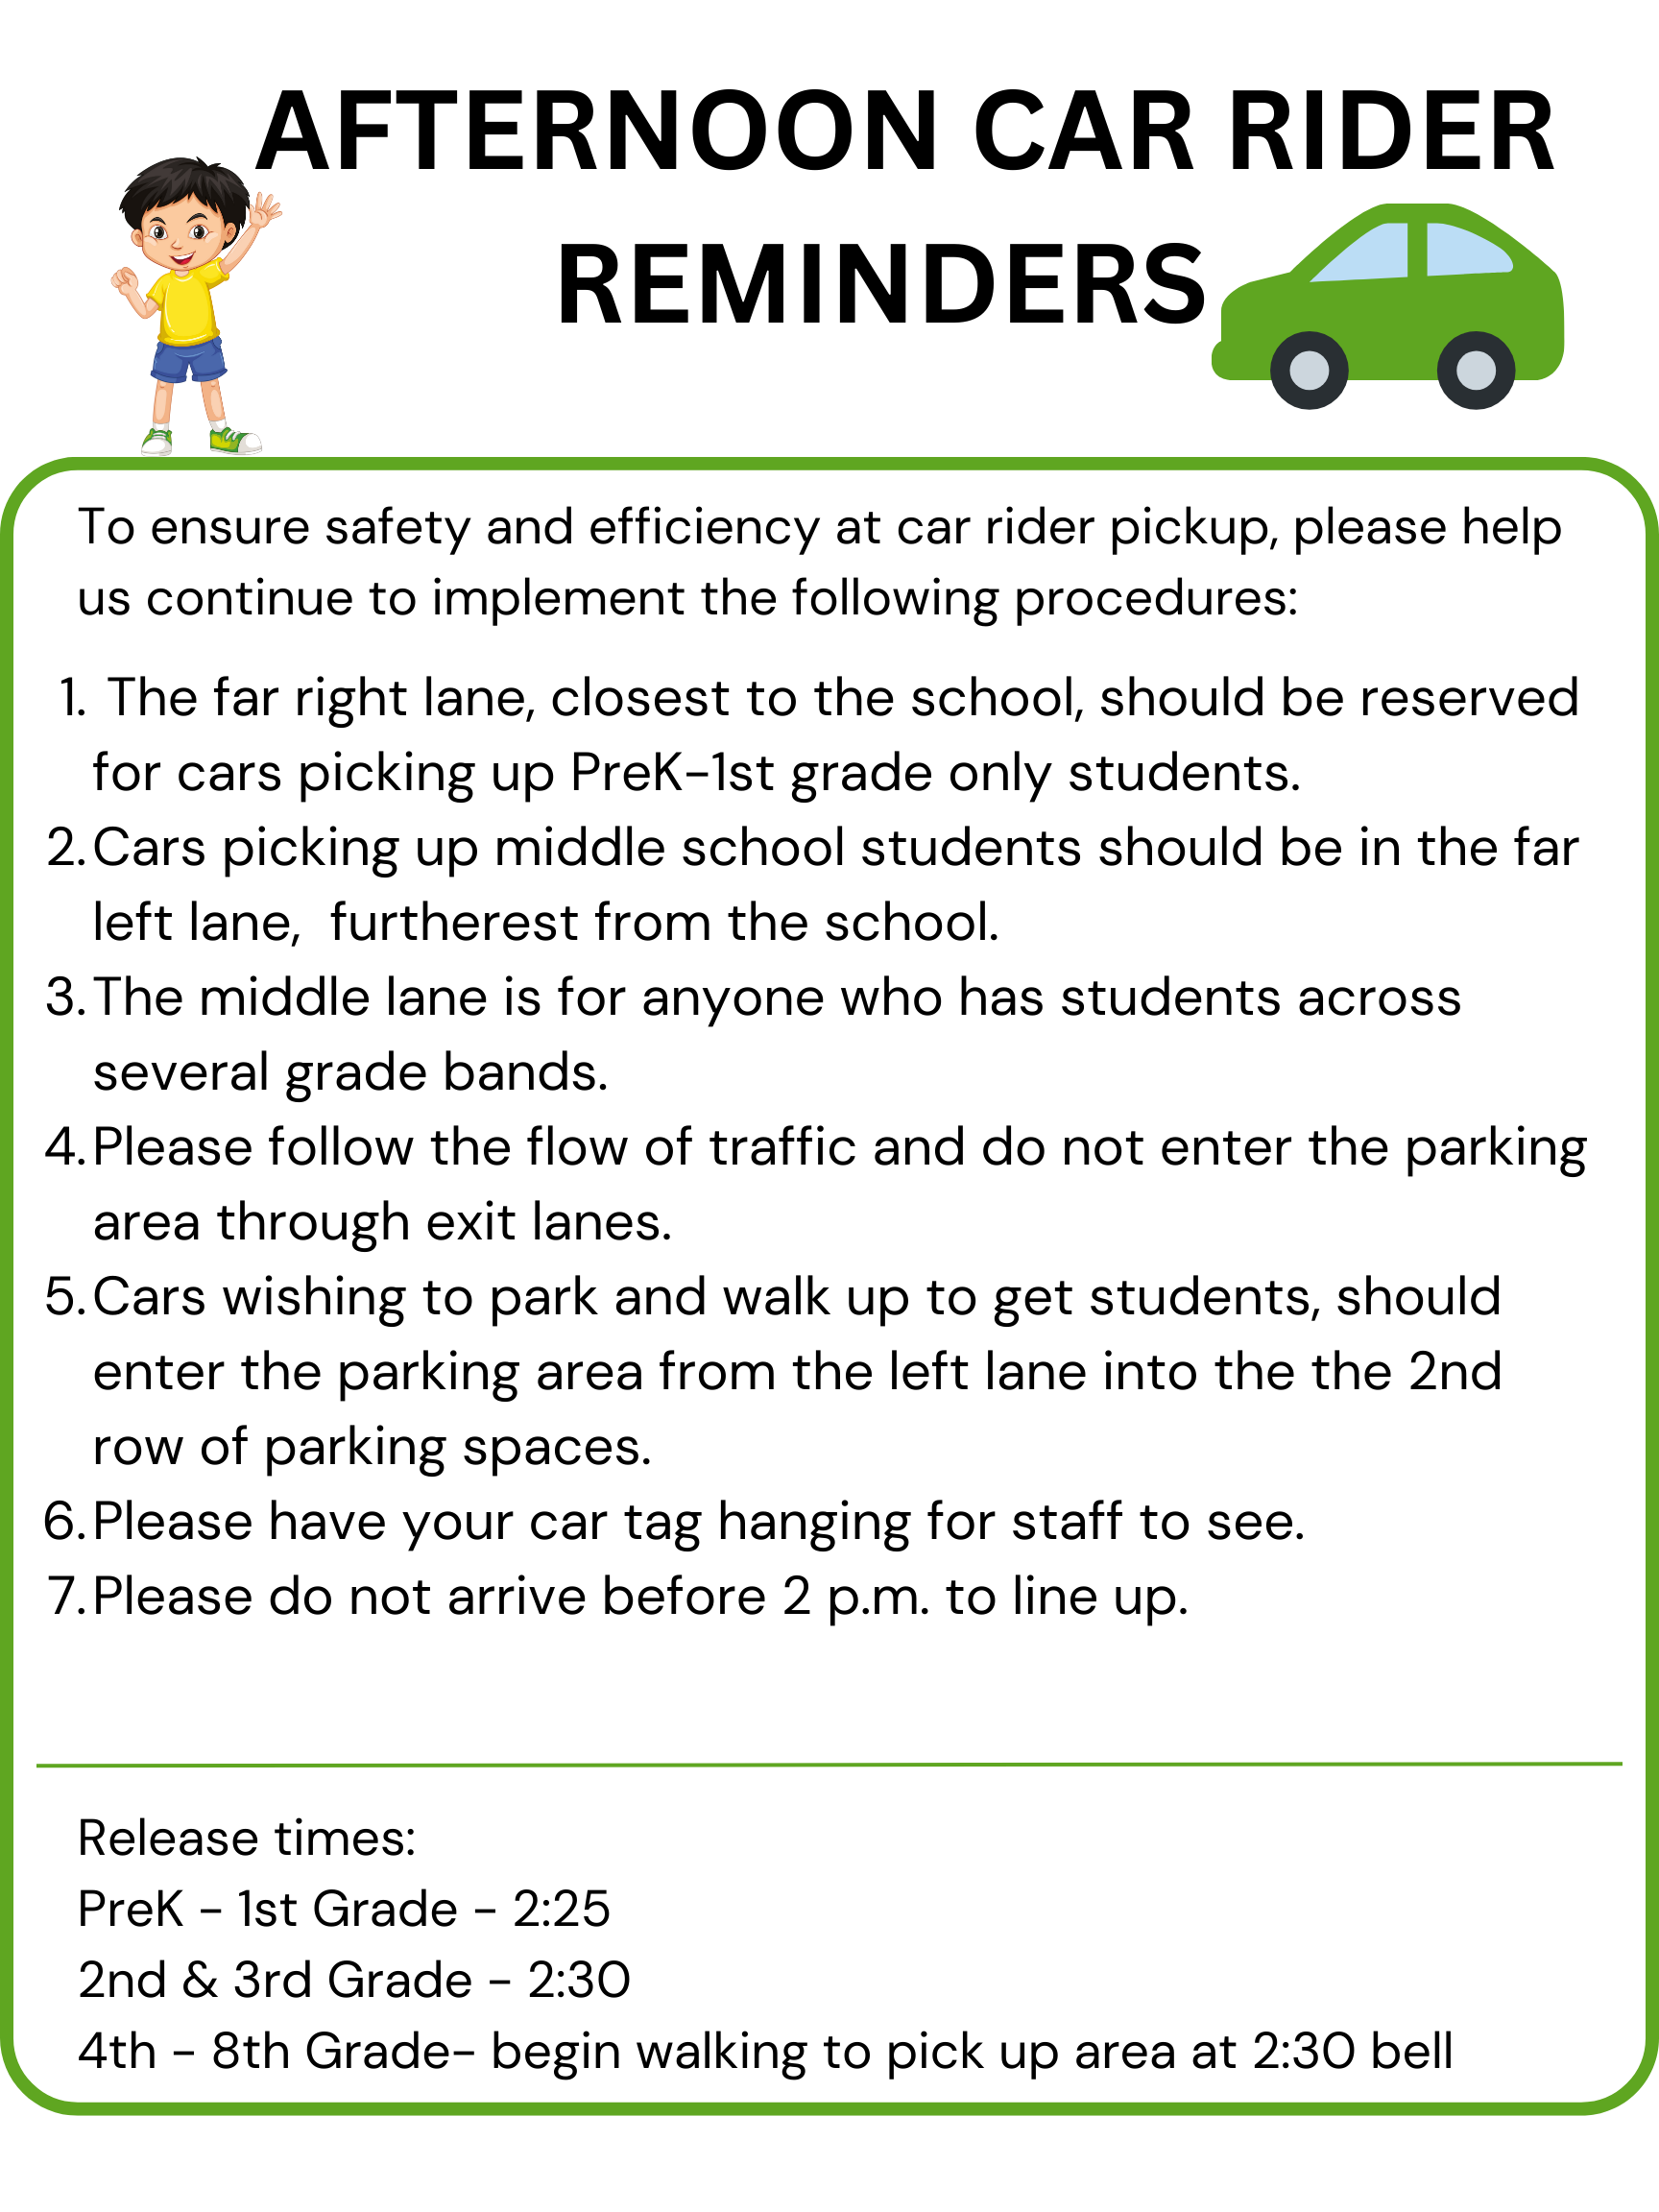 Afternoon Car Rider Reminders